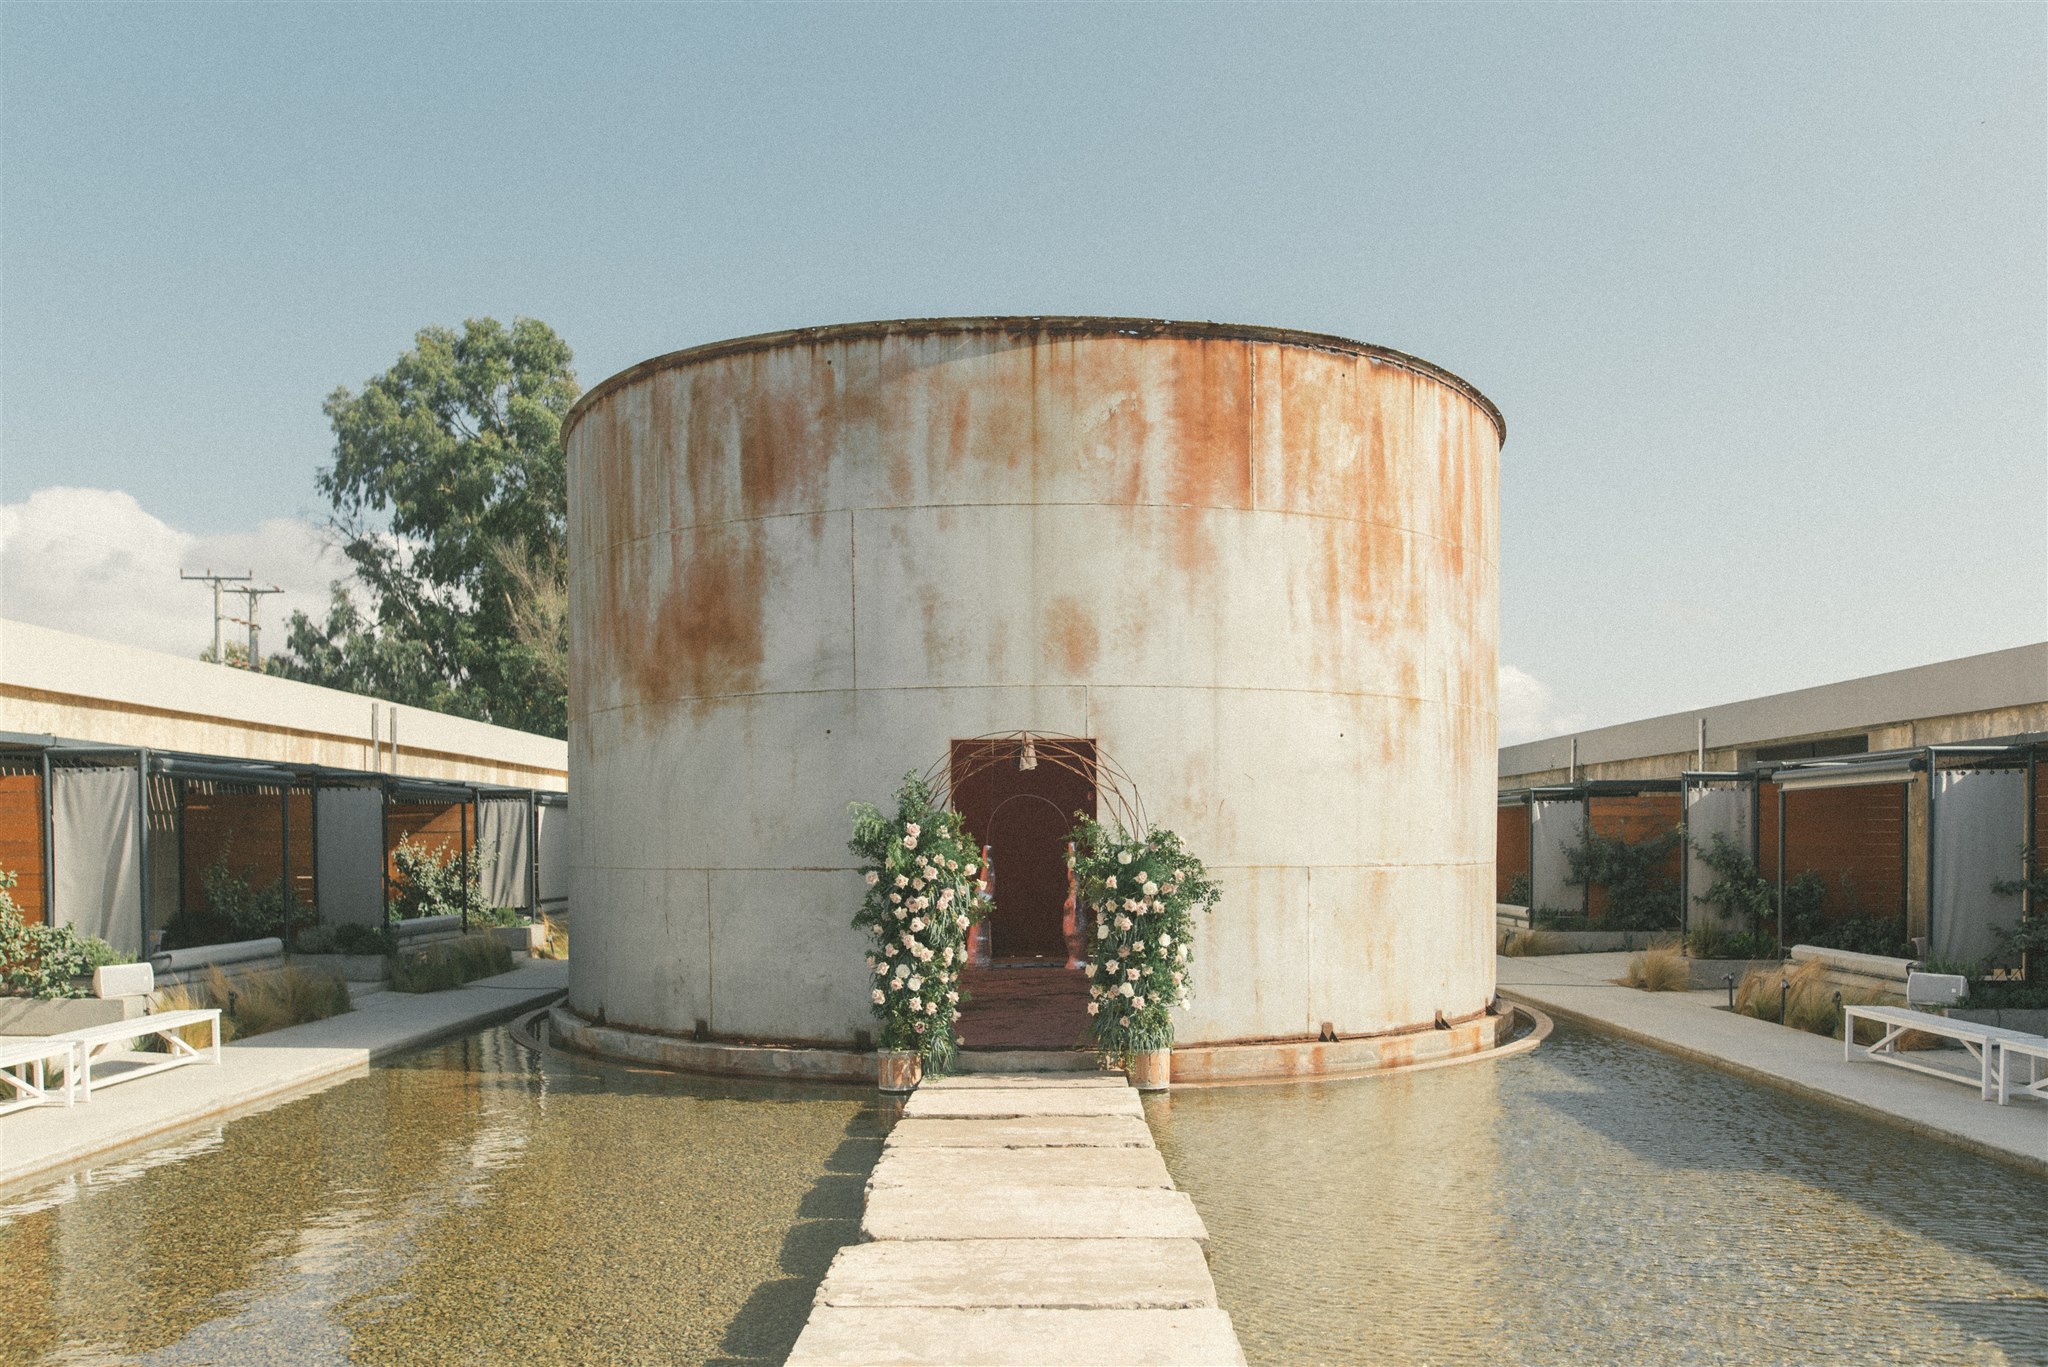 An Architectural Wedding Inside an Abandoned Wine Factory in